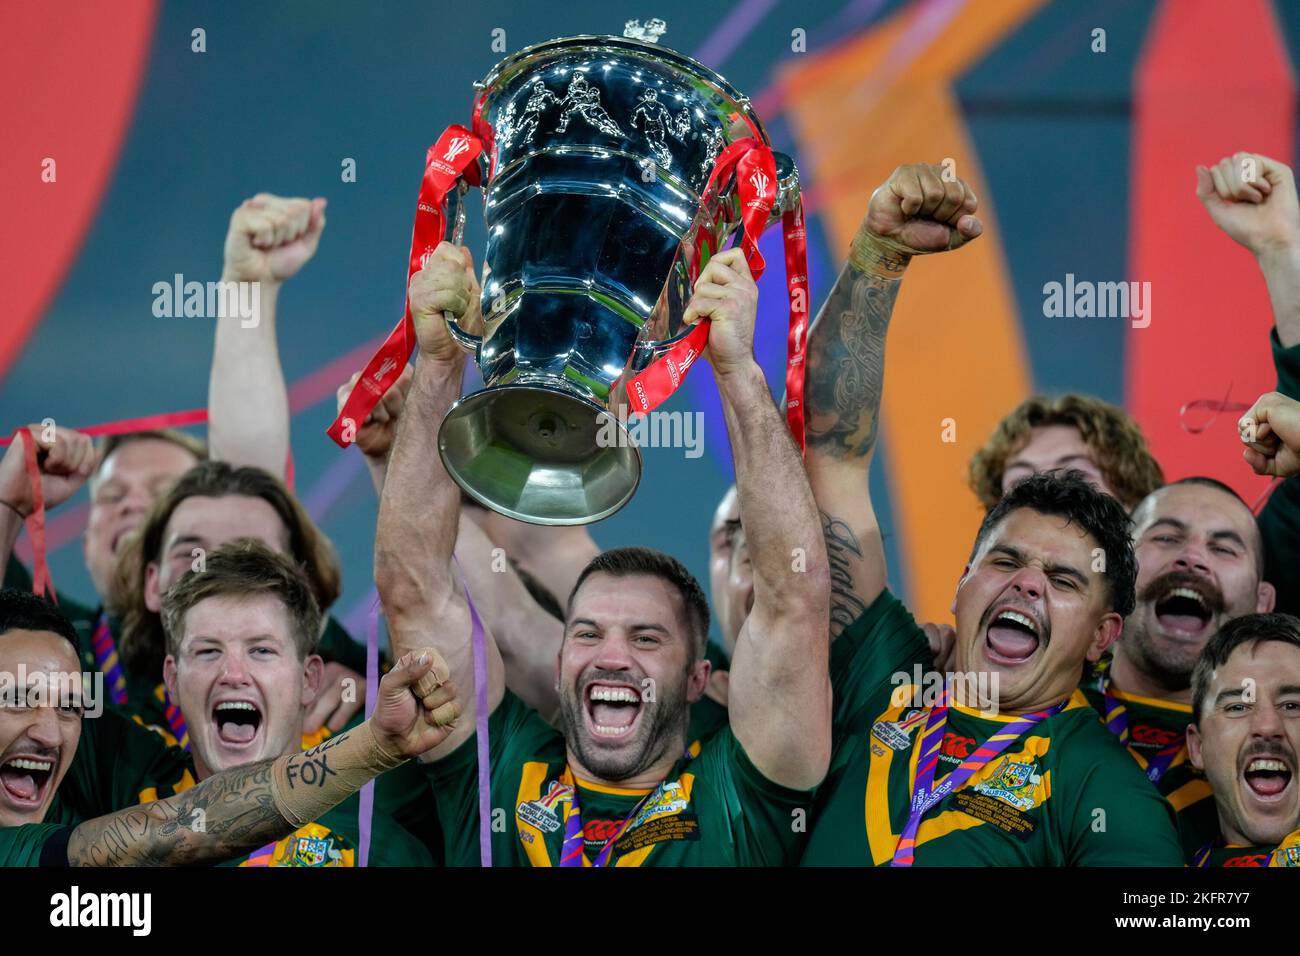 Manchester, UK. 18th Nov, 2022. The Australian Men's team celebrate victory with the World Cup Winner's Trophy in the 2021 Rugby League World Cup Final 2021 match between Australia and Samoa at Old Trafford, Manchester, England on 19 November 2022. Photo by David Horn. Credit: PRiME Media Images/Alamy Live News Stock Photo